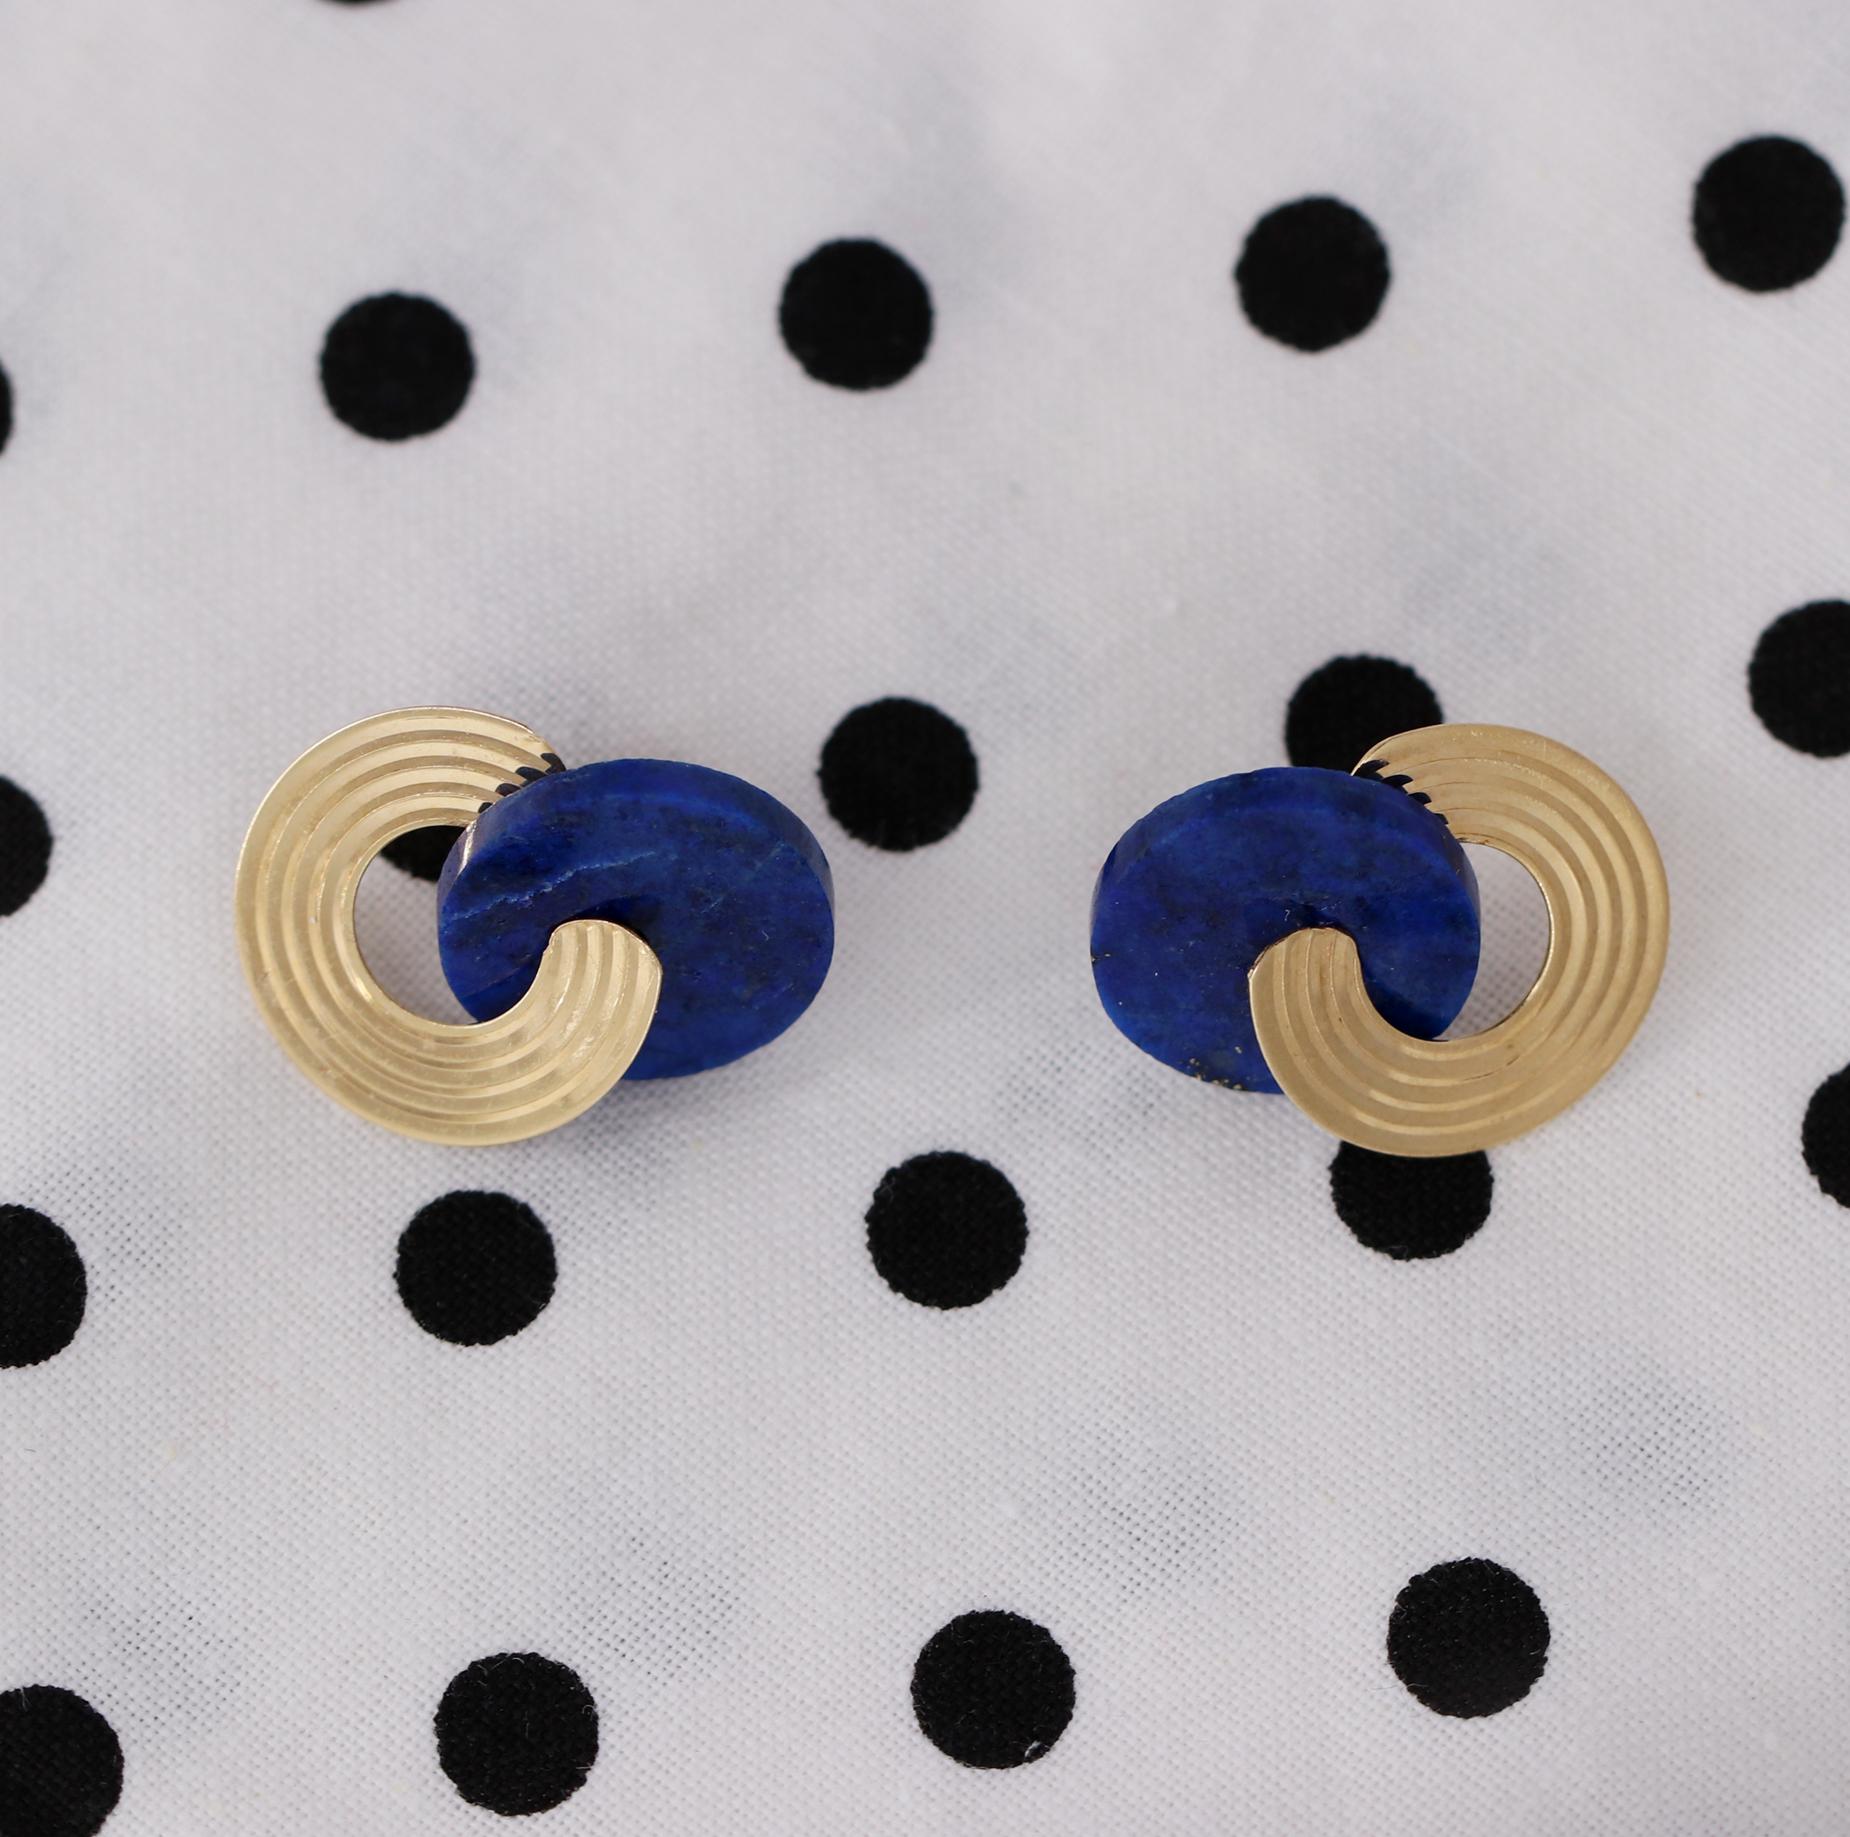 A pair of 14K yellow gold earrings comprised of a 15mm lapis lazuli disc measuring 15mm. A gold post runs through the disc, and is affixed to a grooved piece of gold which creates the appearance of a figure 8 or congruent circles. This modern design